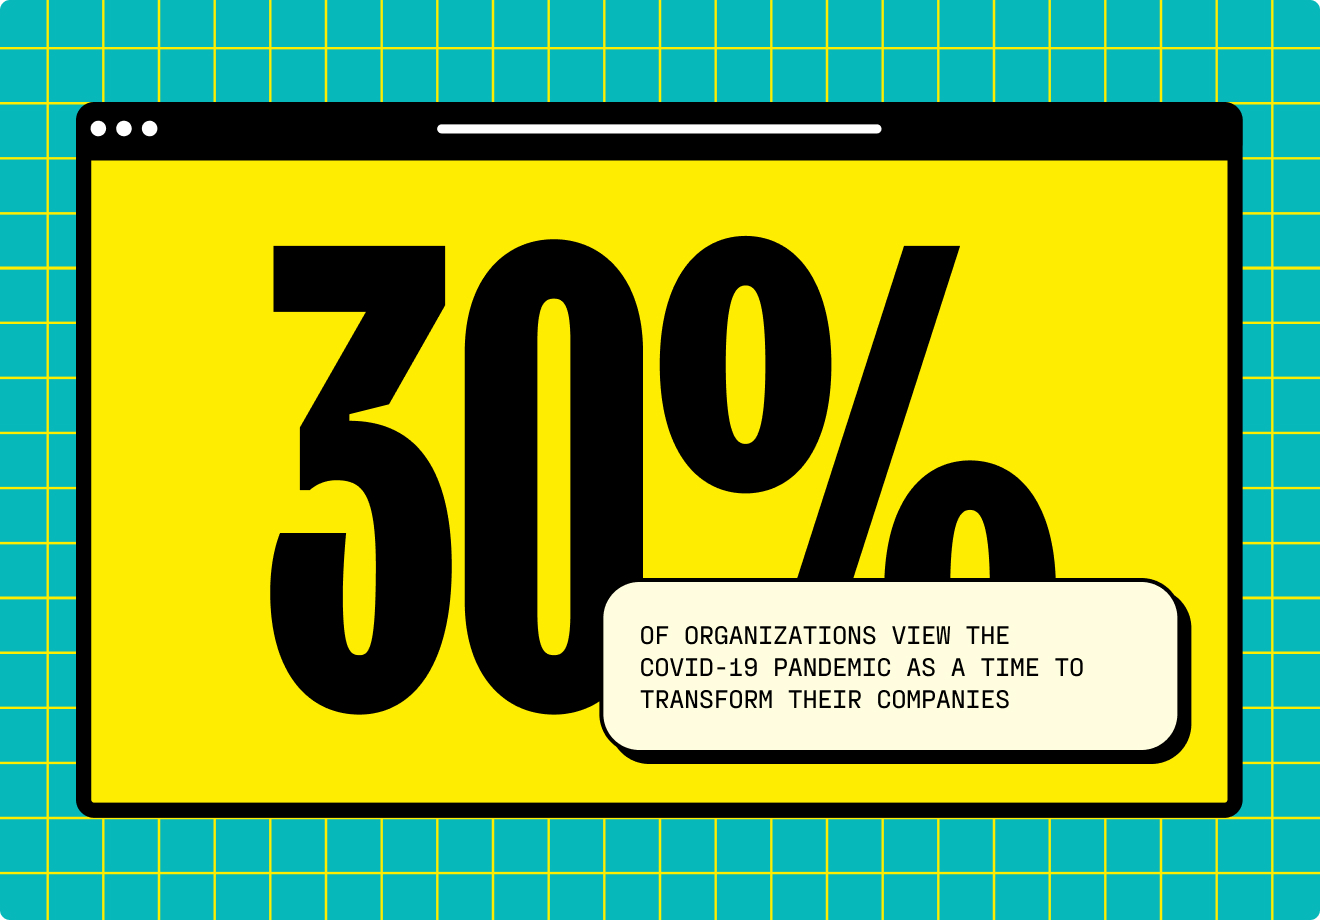 According to Capgemini, 30% of organizations view the COVID-19 pandemic as a time to transform their companies.